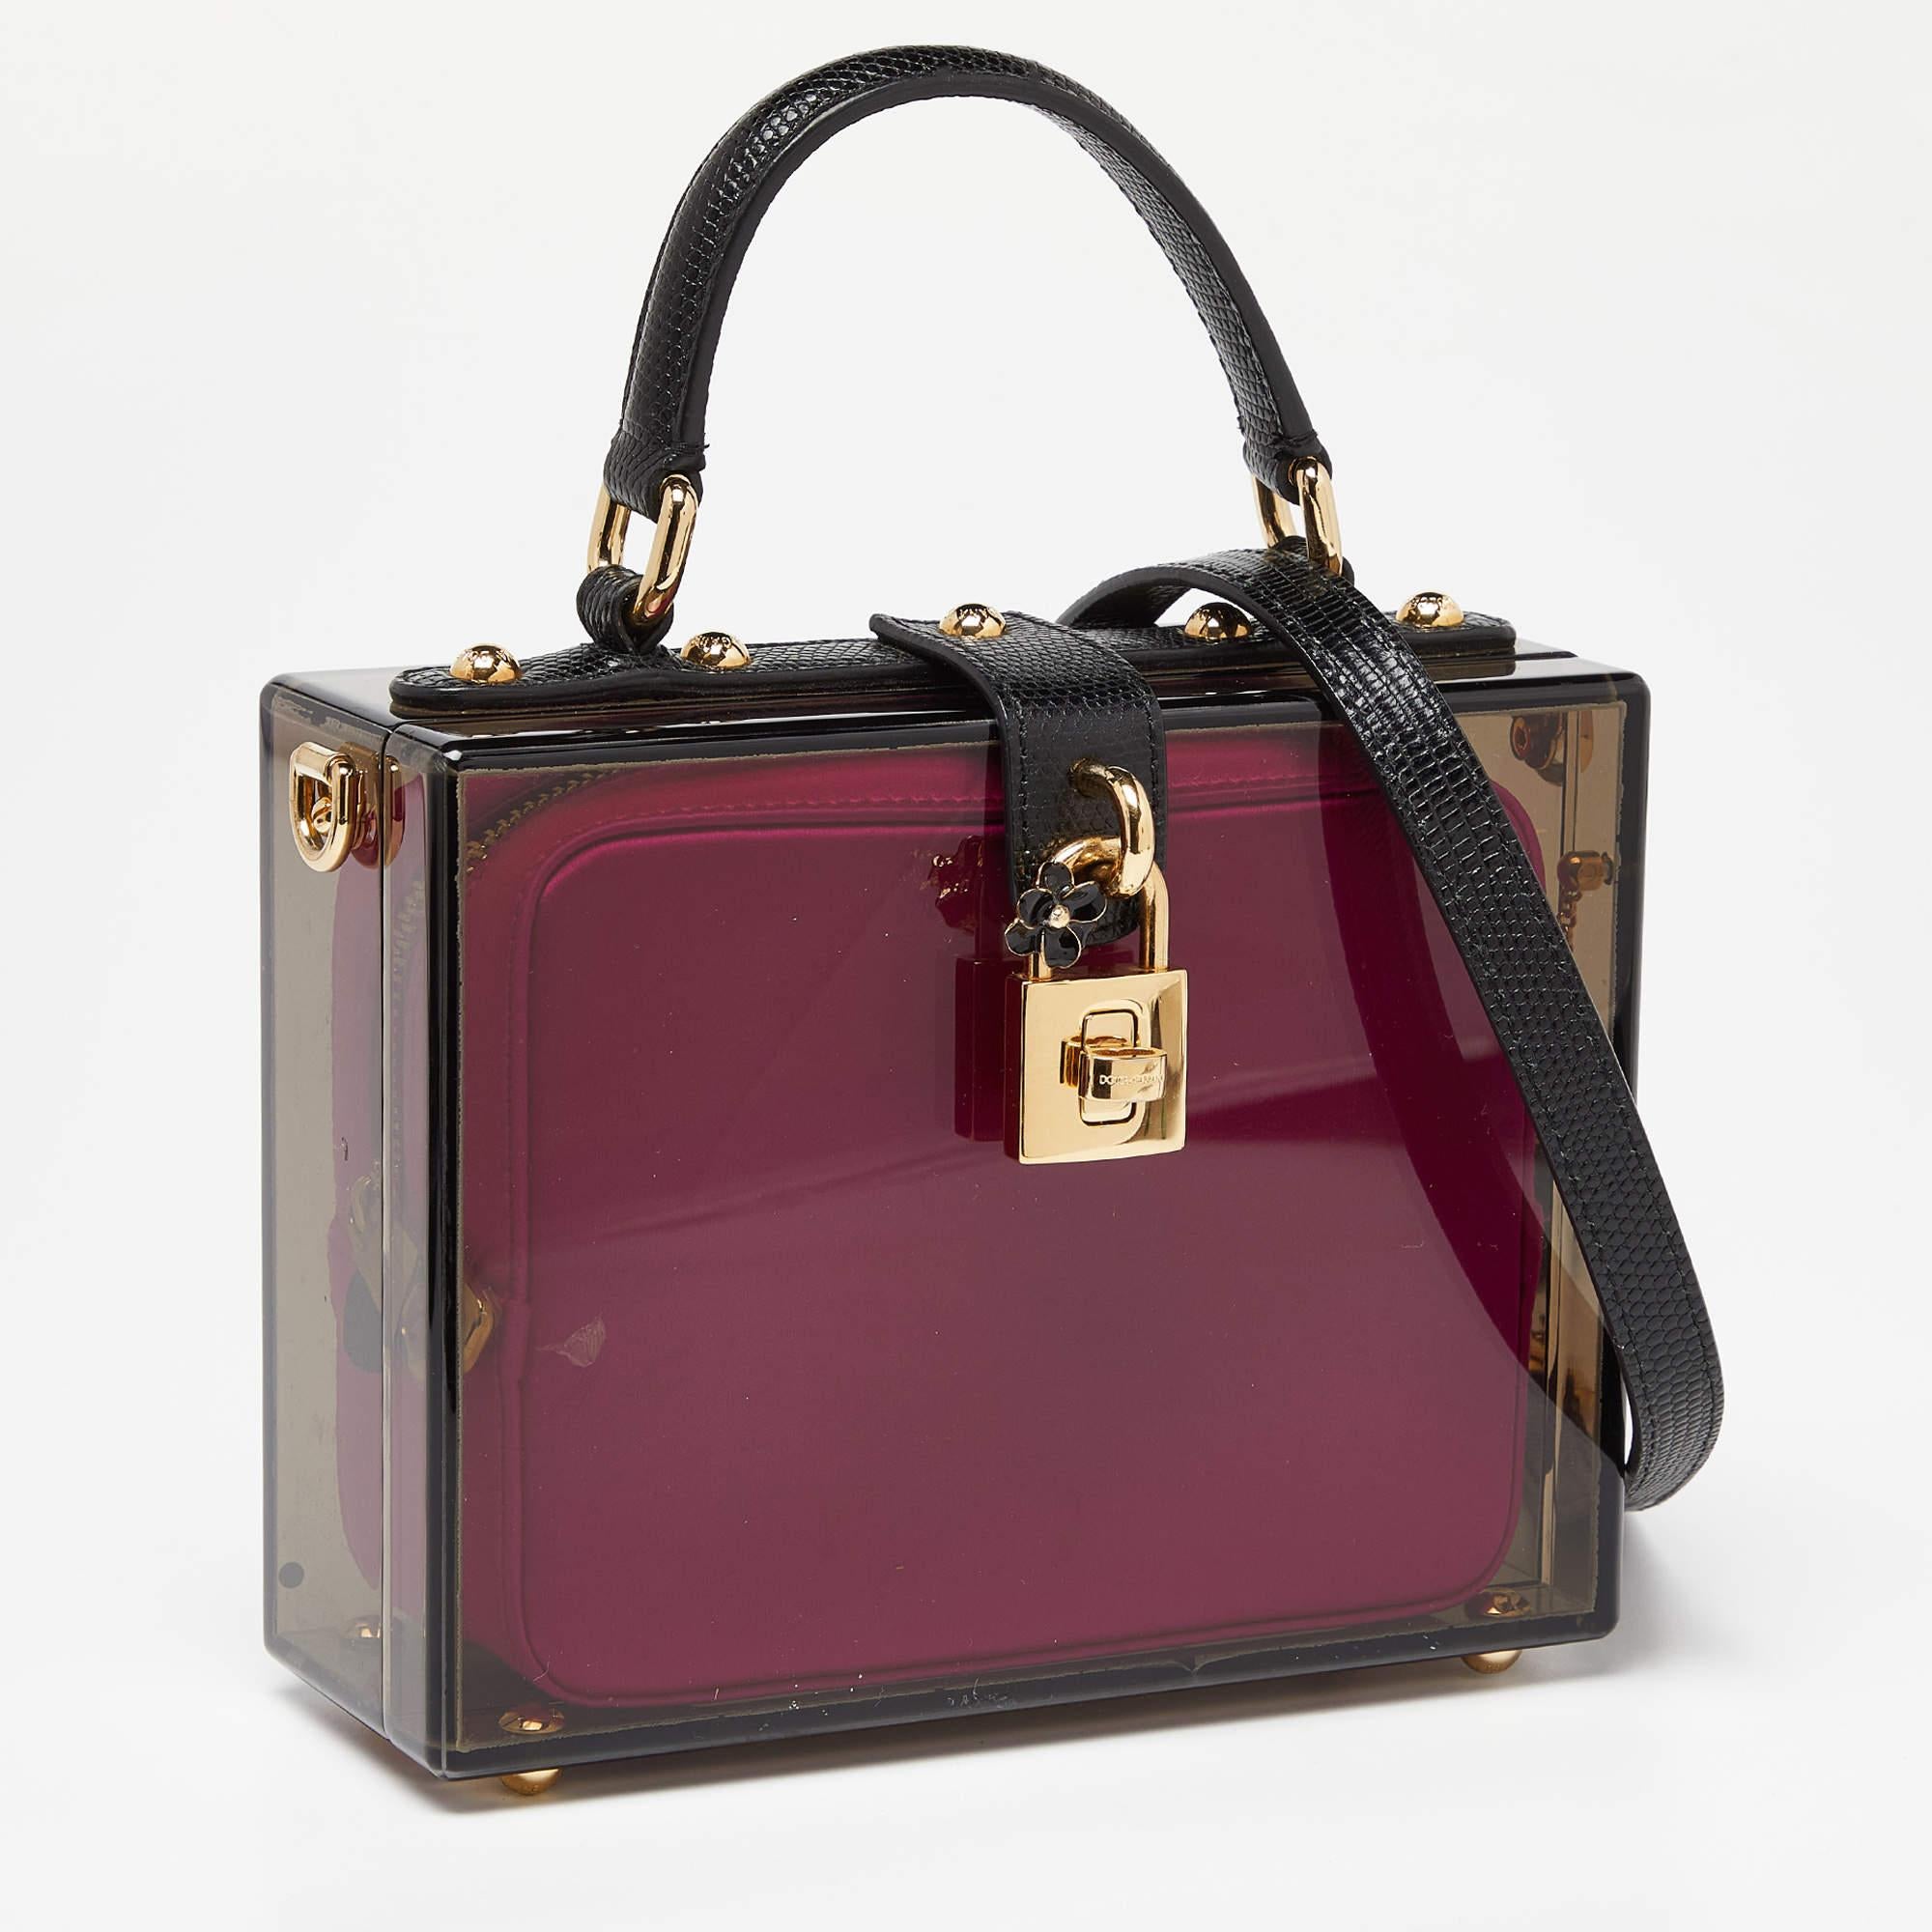 Dolce & Gabbana Black/Pink Acrylic and Leather Dolce Box Bag 6